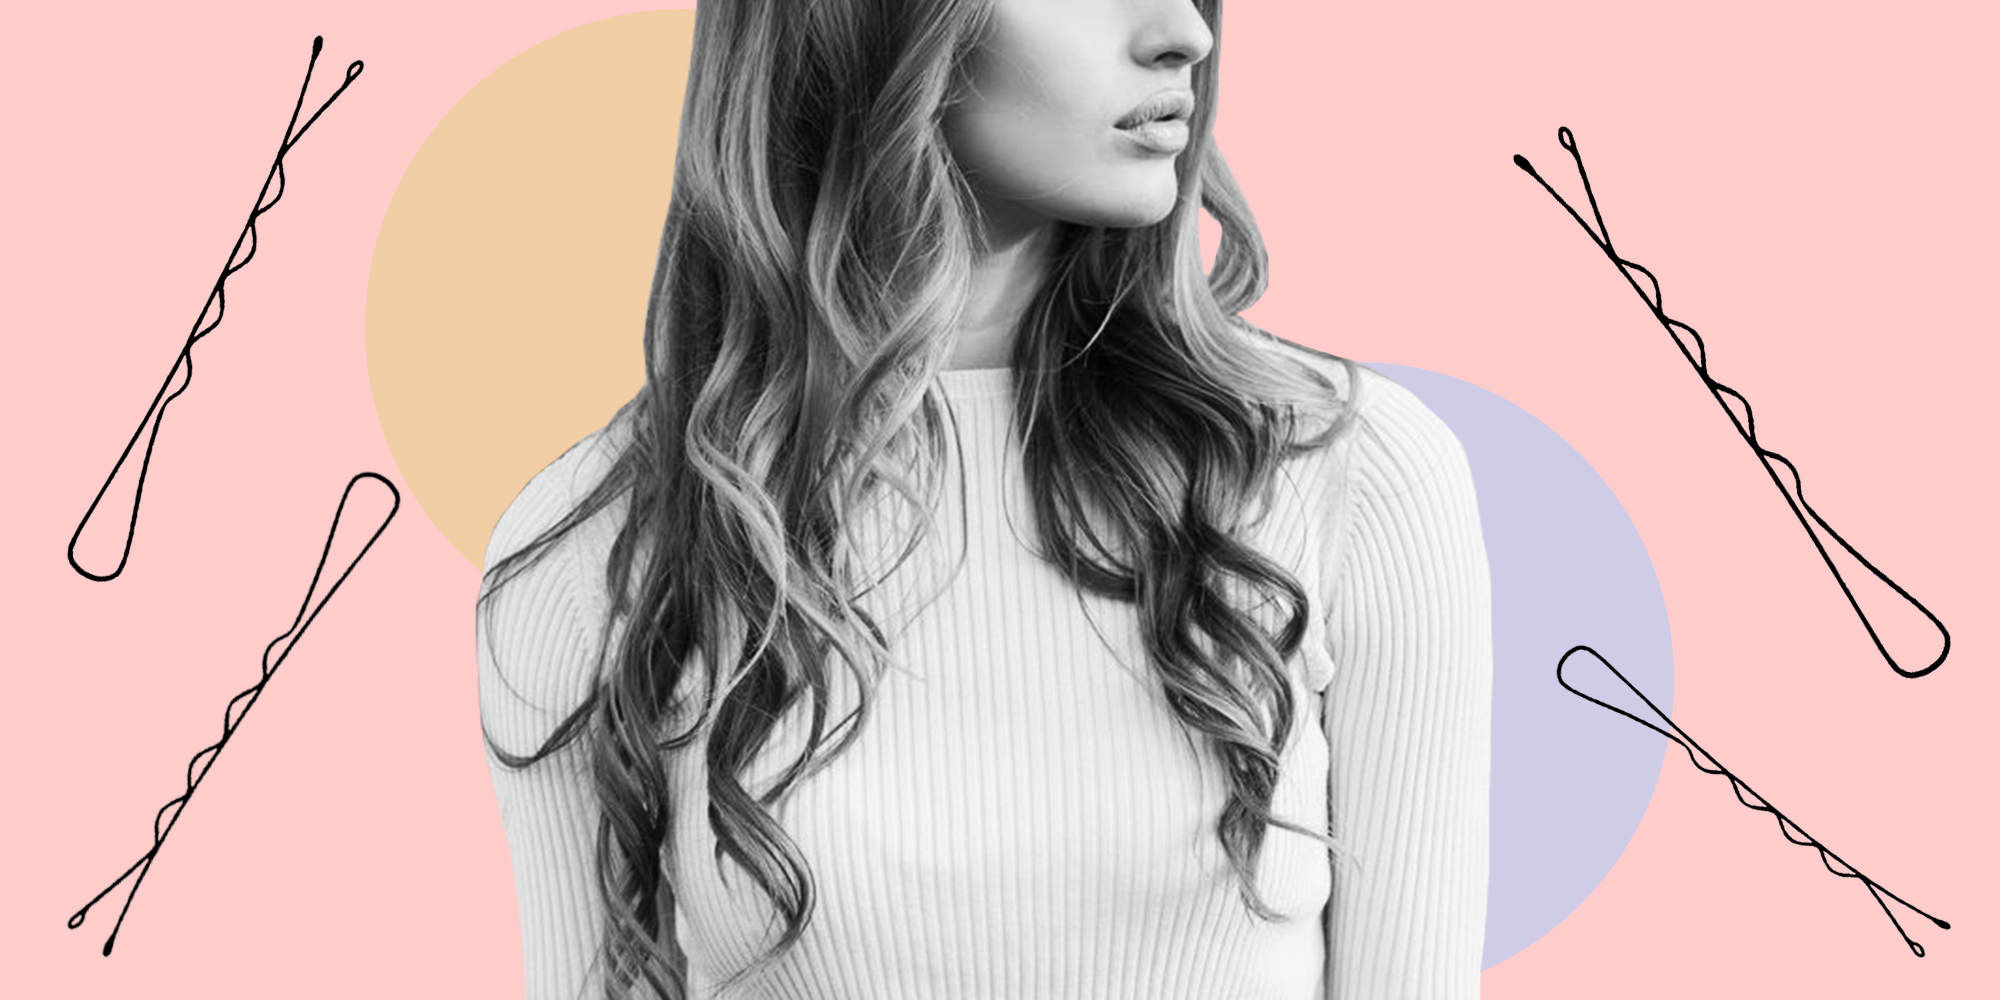 7 Heatless Curl Hack Tutorials to Try - How to Curl Hair on Every Texture